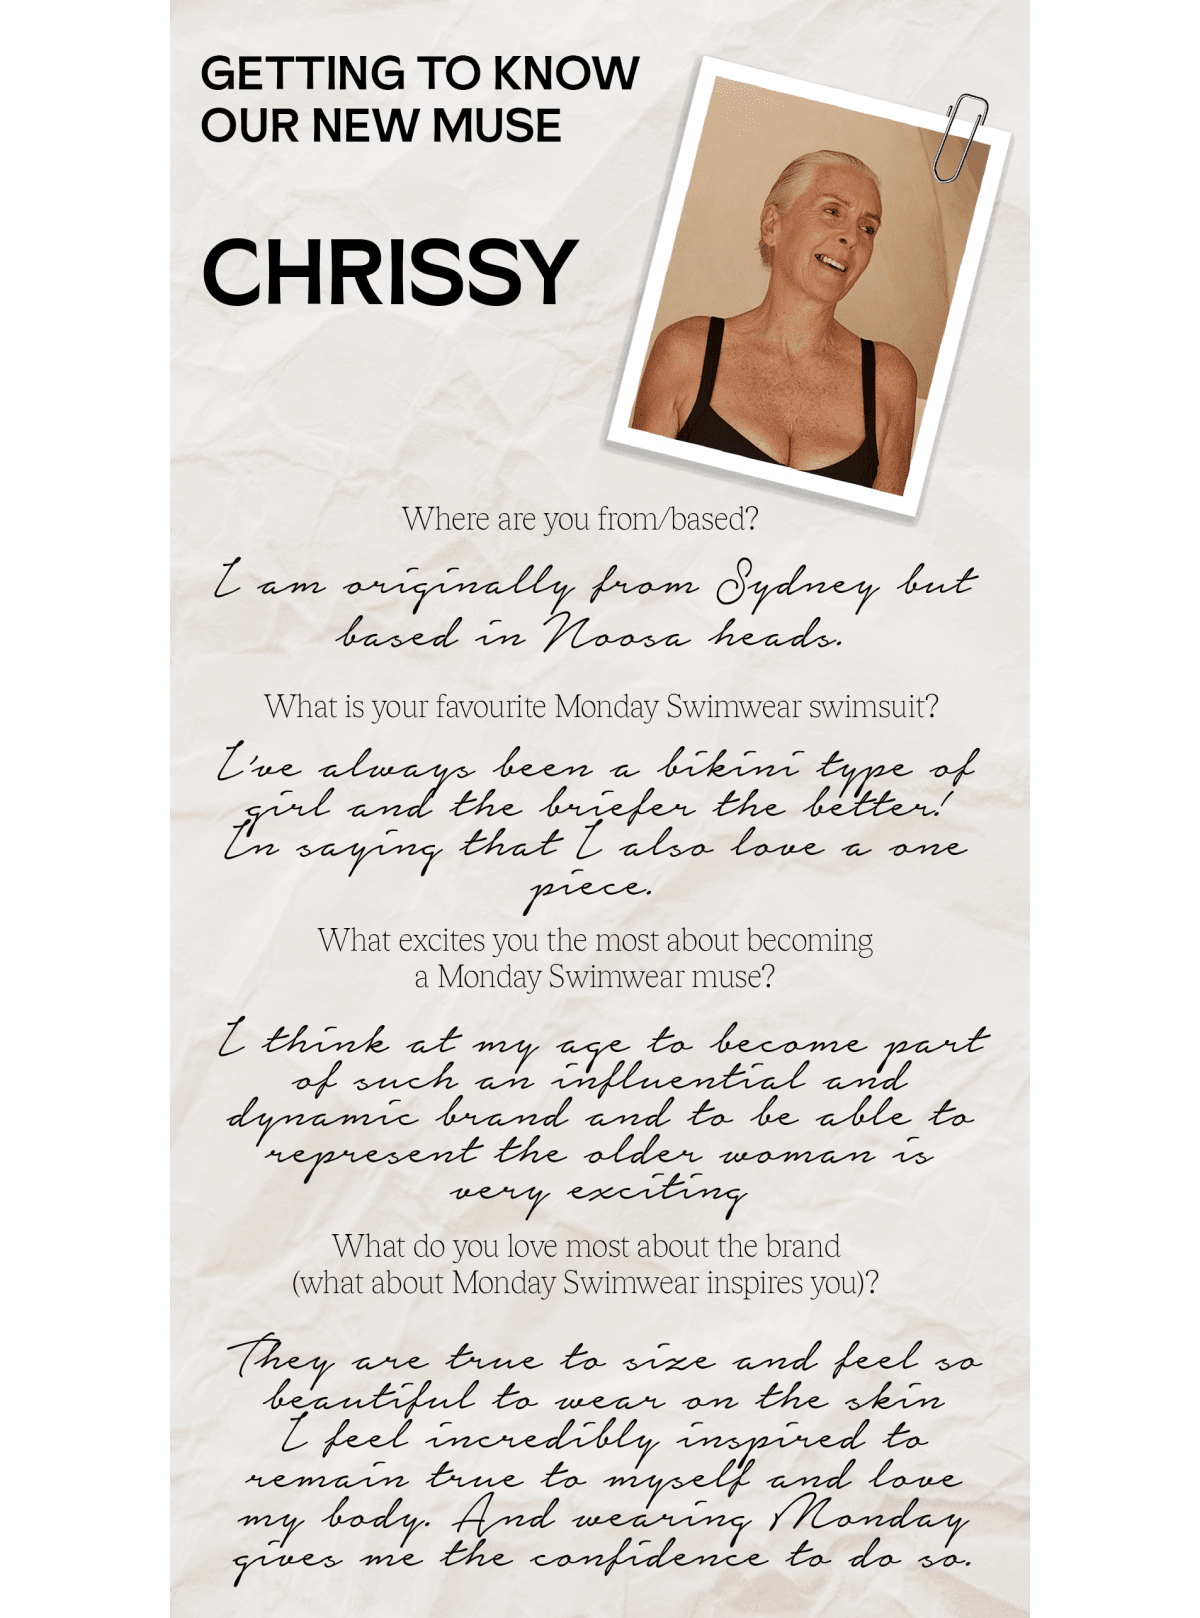 GETTING TO KNOW OUR NEW MUSE CHRISSY Where are you frombased? L am oniginally foom Sydney Lot What is your favourite Monday Swimwear swimsuit? W Lhe biefer Lhe Letler W. What excites you the most about becoming a Monday Swimwear muse? B e Lyiric docord ard o e ihle to the older womnrar s o - What do you love most about the brand what about Monday Swimwear inspires you? W LT %hamw% SO 